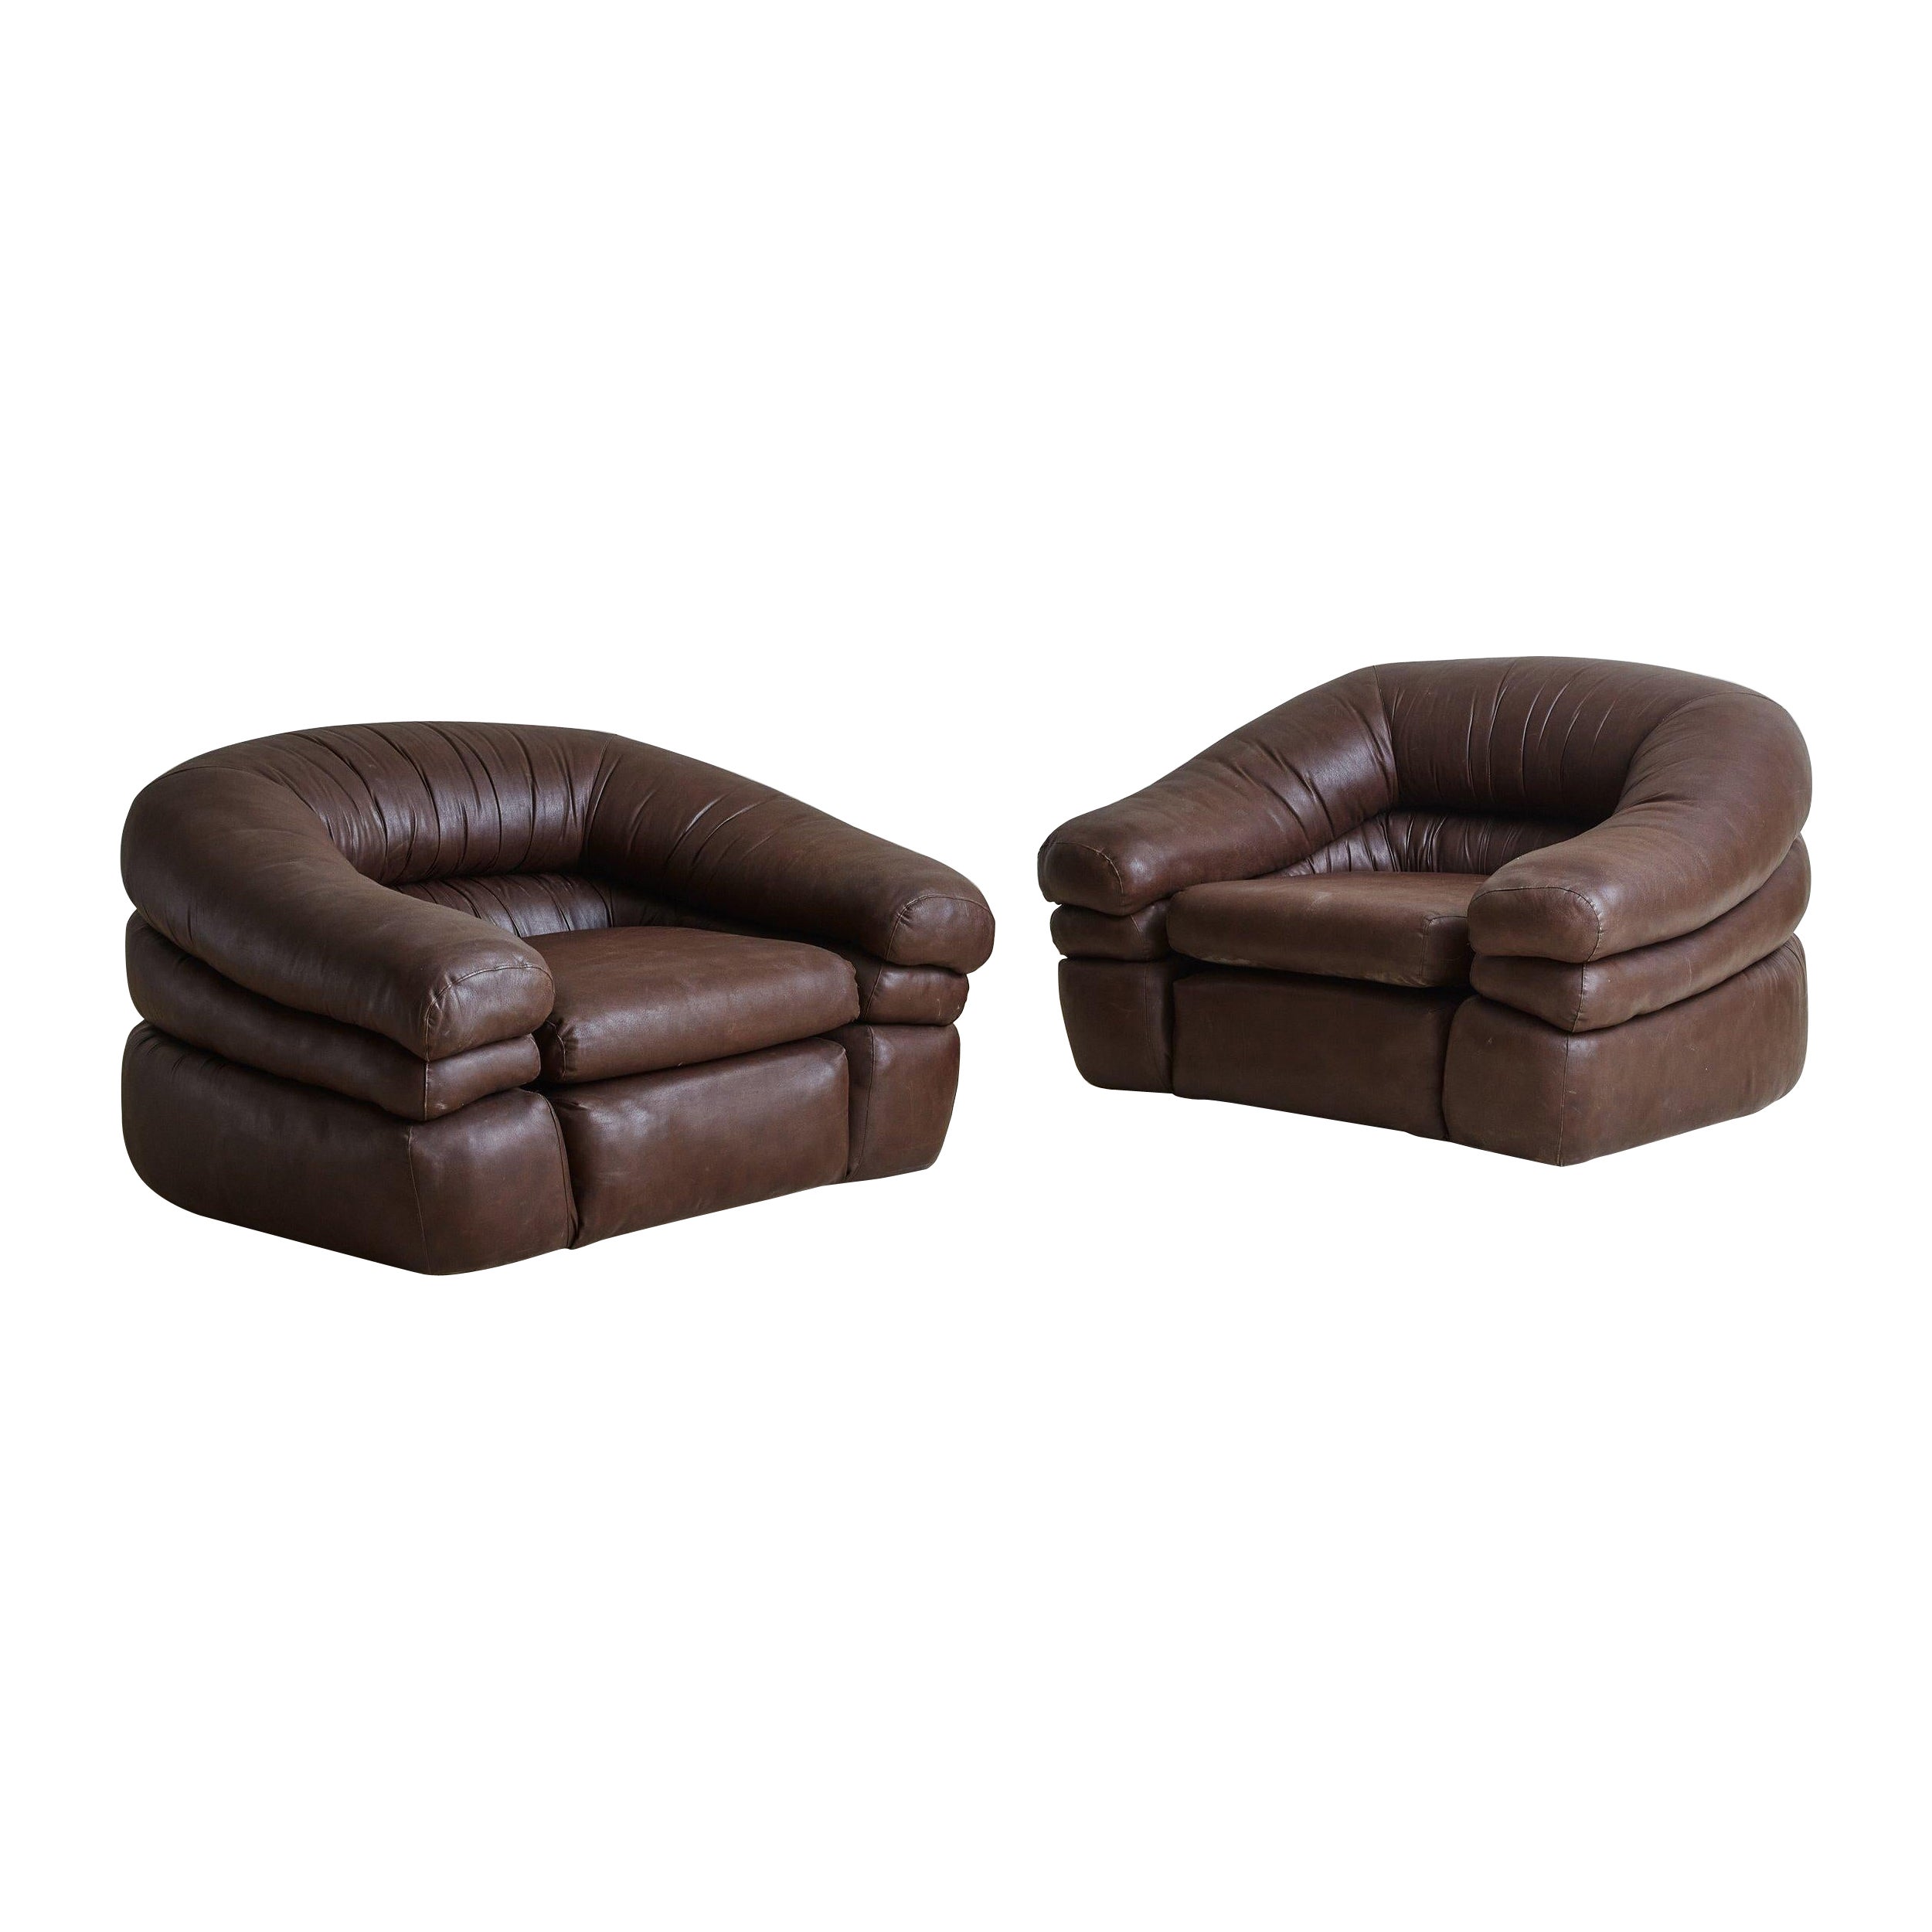 Pair of Large Brown Leather Lounge Chairs by de Pas, D’Urbino & Lomazzi, Italy For Sale